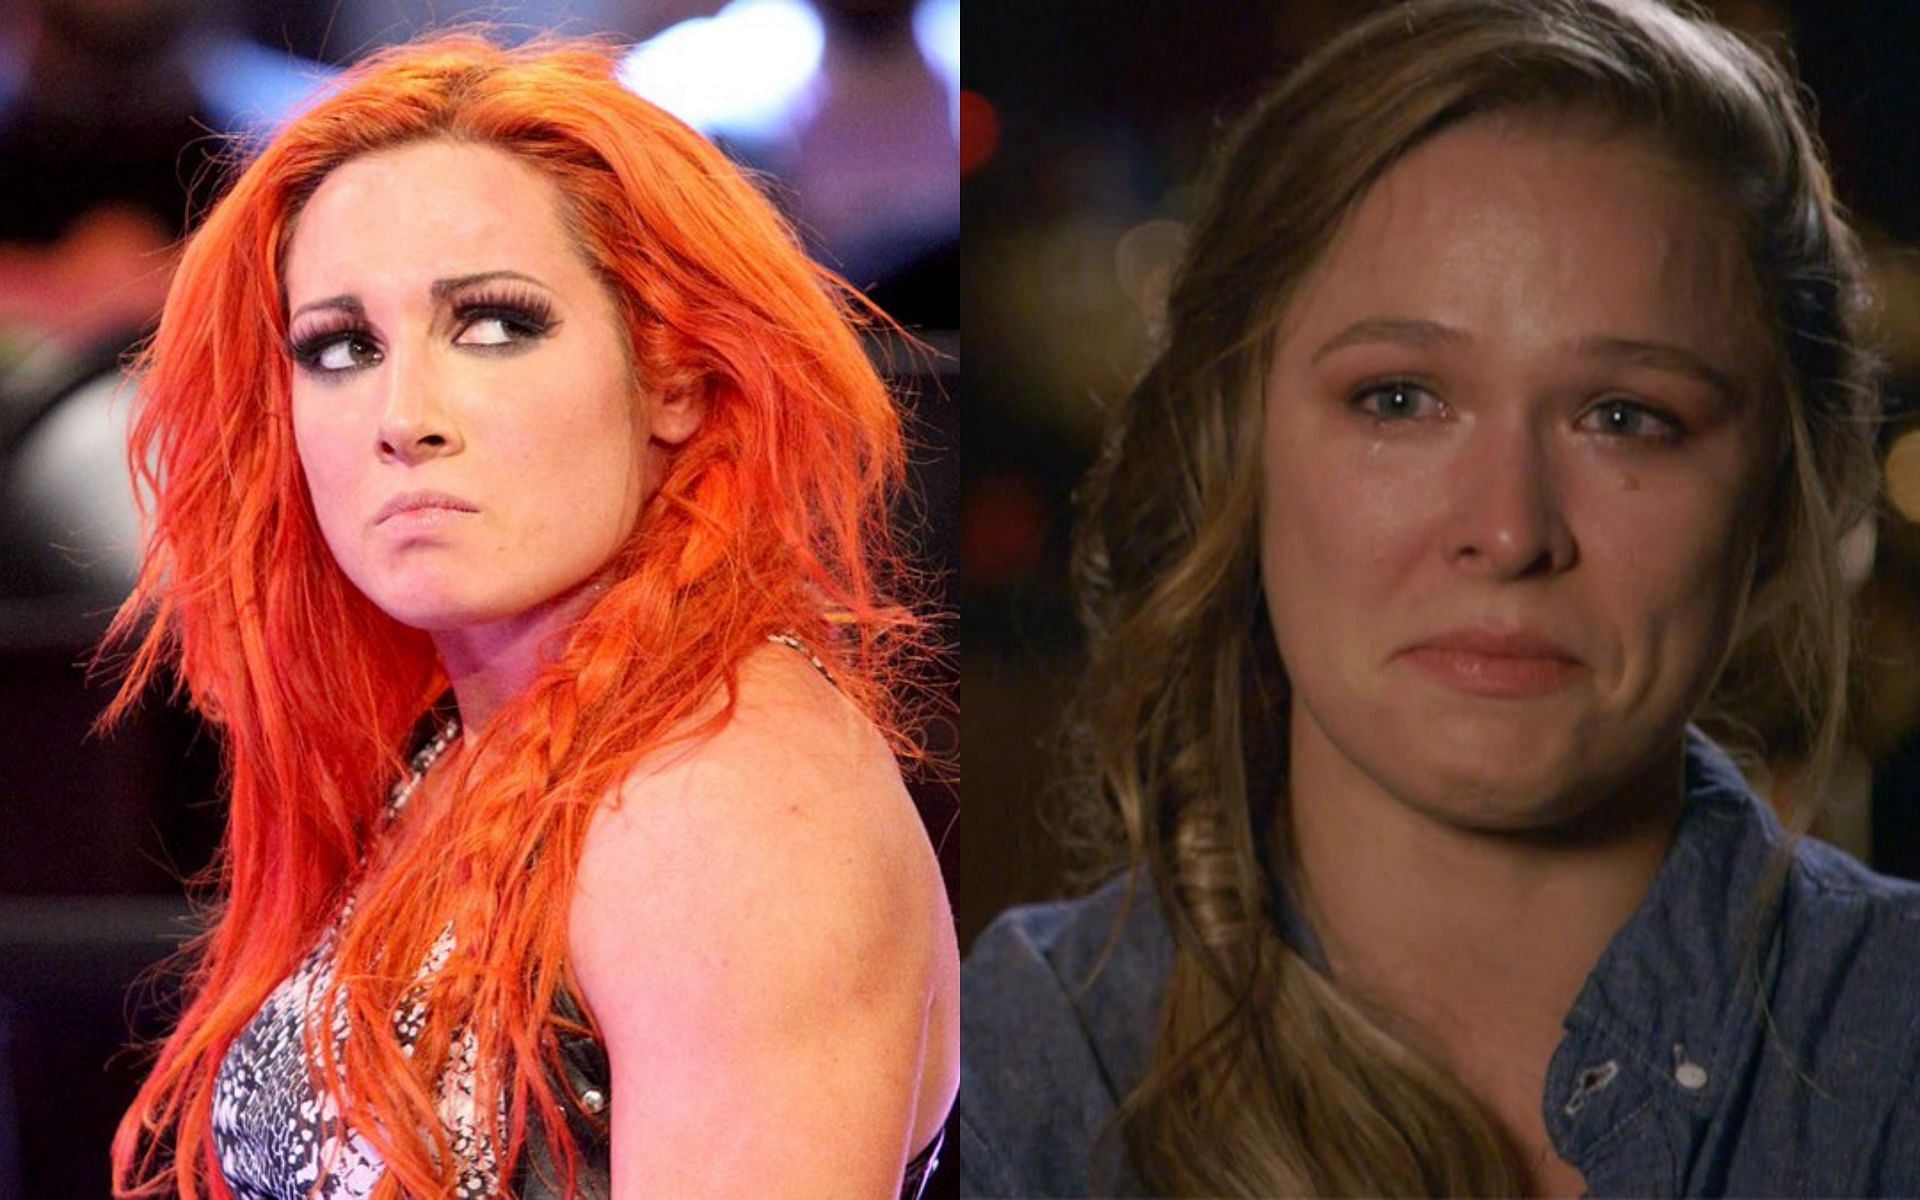 Becky Lynch and Ronda Rousey have recently been two of the most high-profile women stars in WWE.